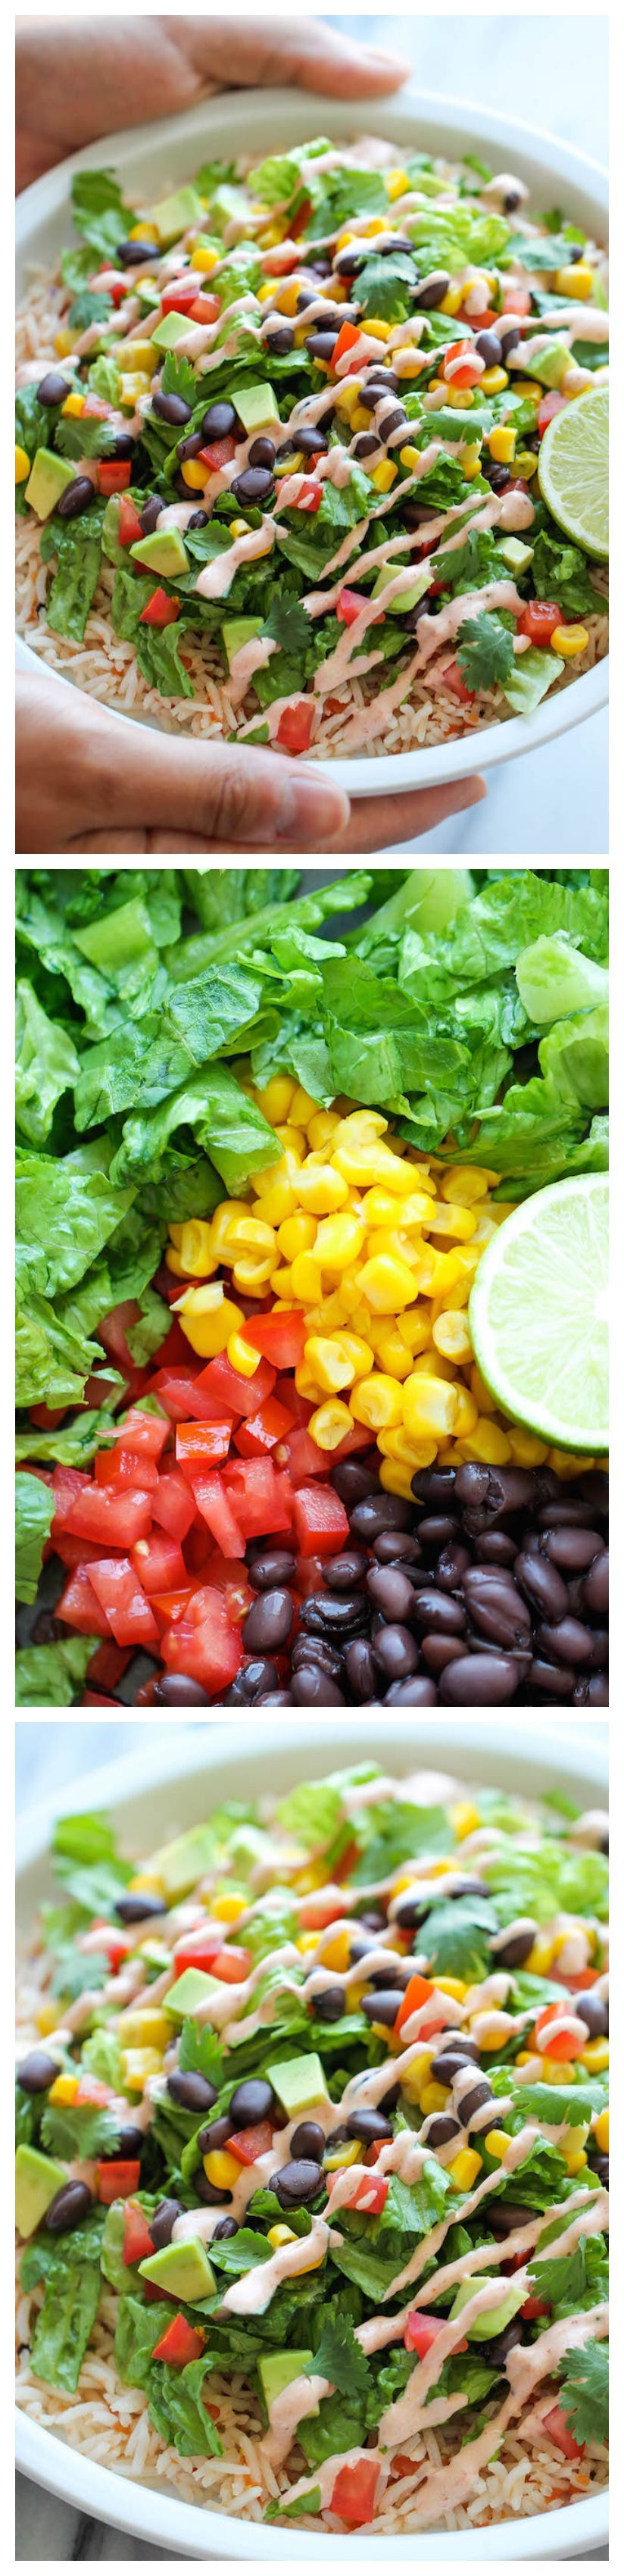 Easy Burrito Bowls – Skip Chipotle and try these burrito bowls right at home. Its easier, healthier and 10000x tastier!